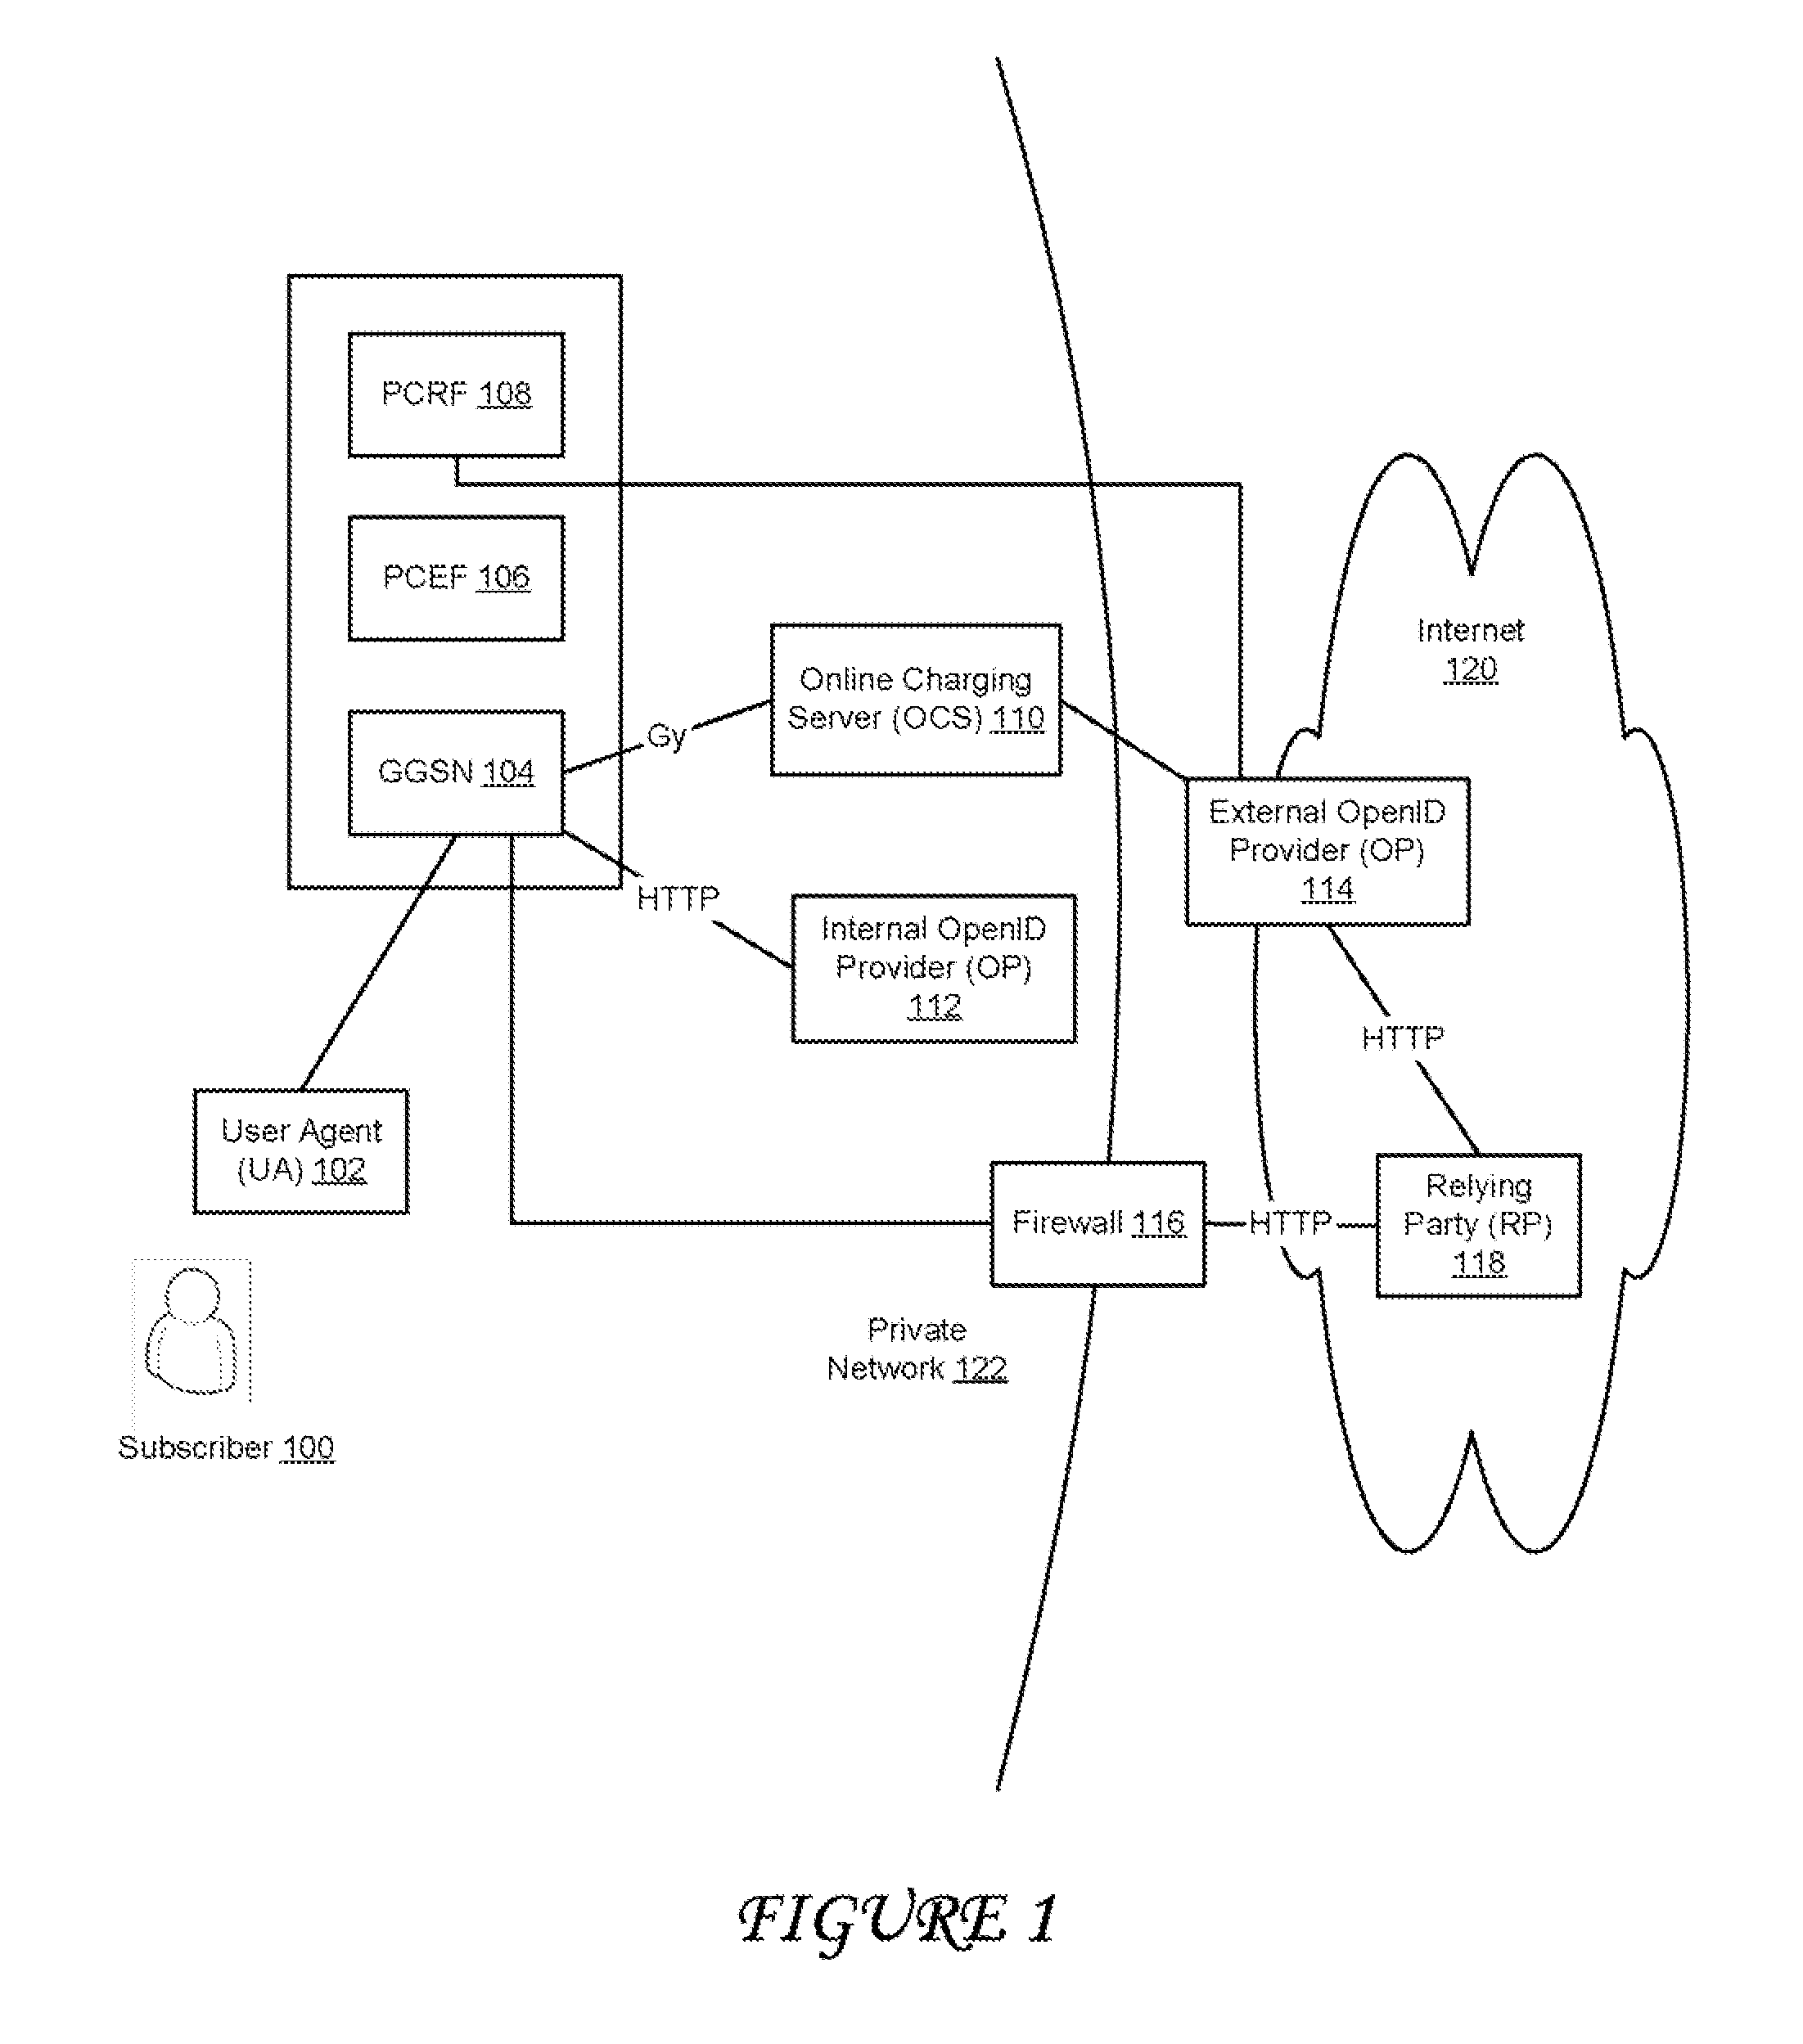 Systems and methods of integrating openid with a telecommunications network